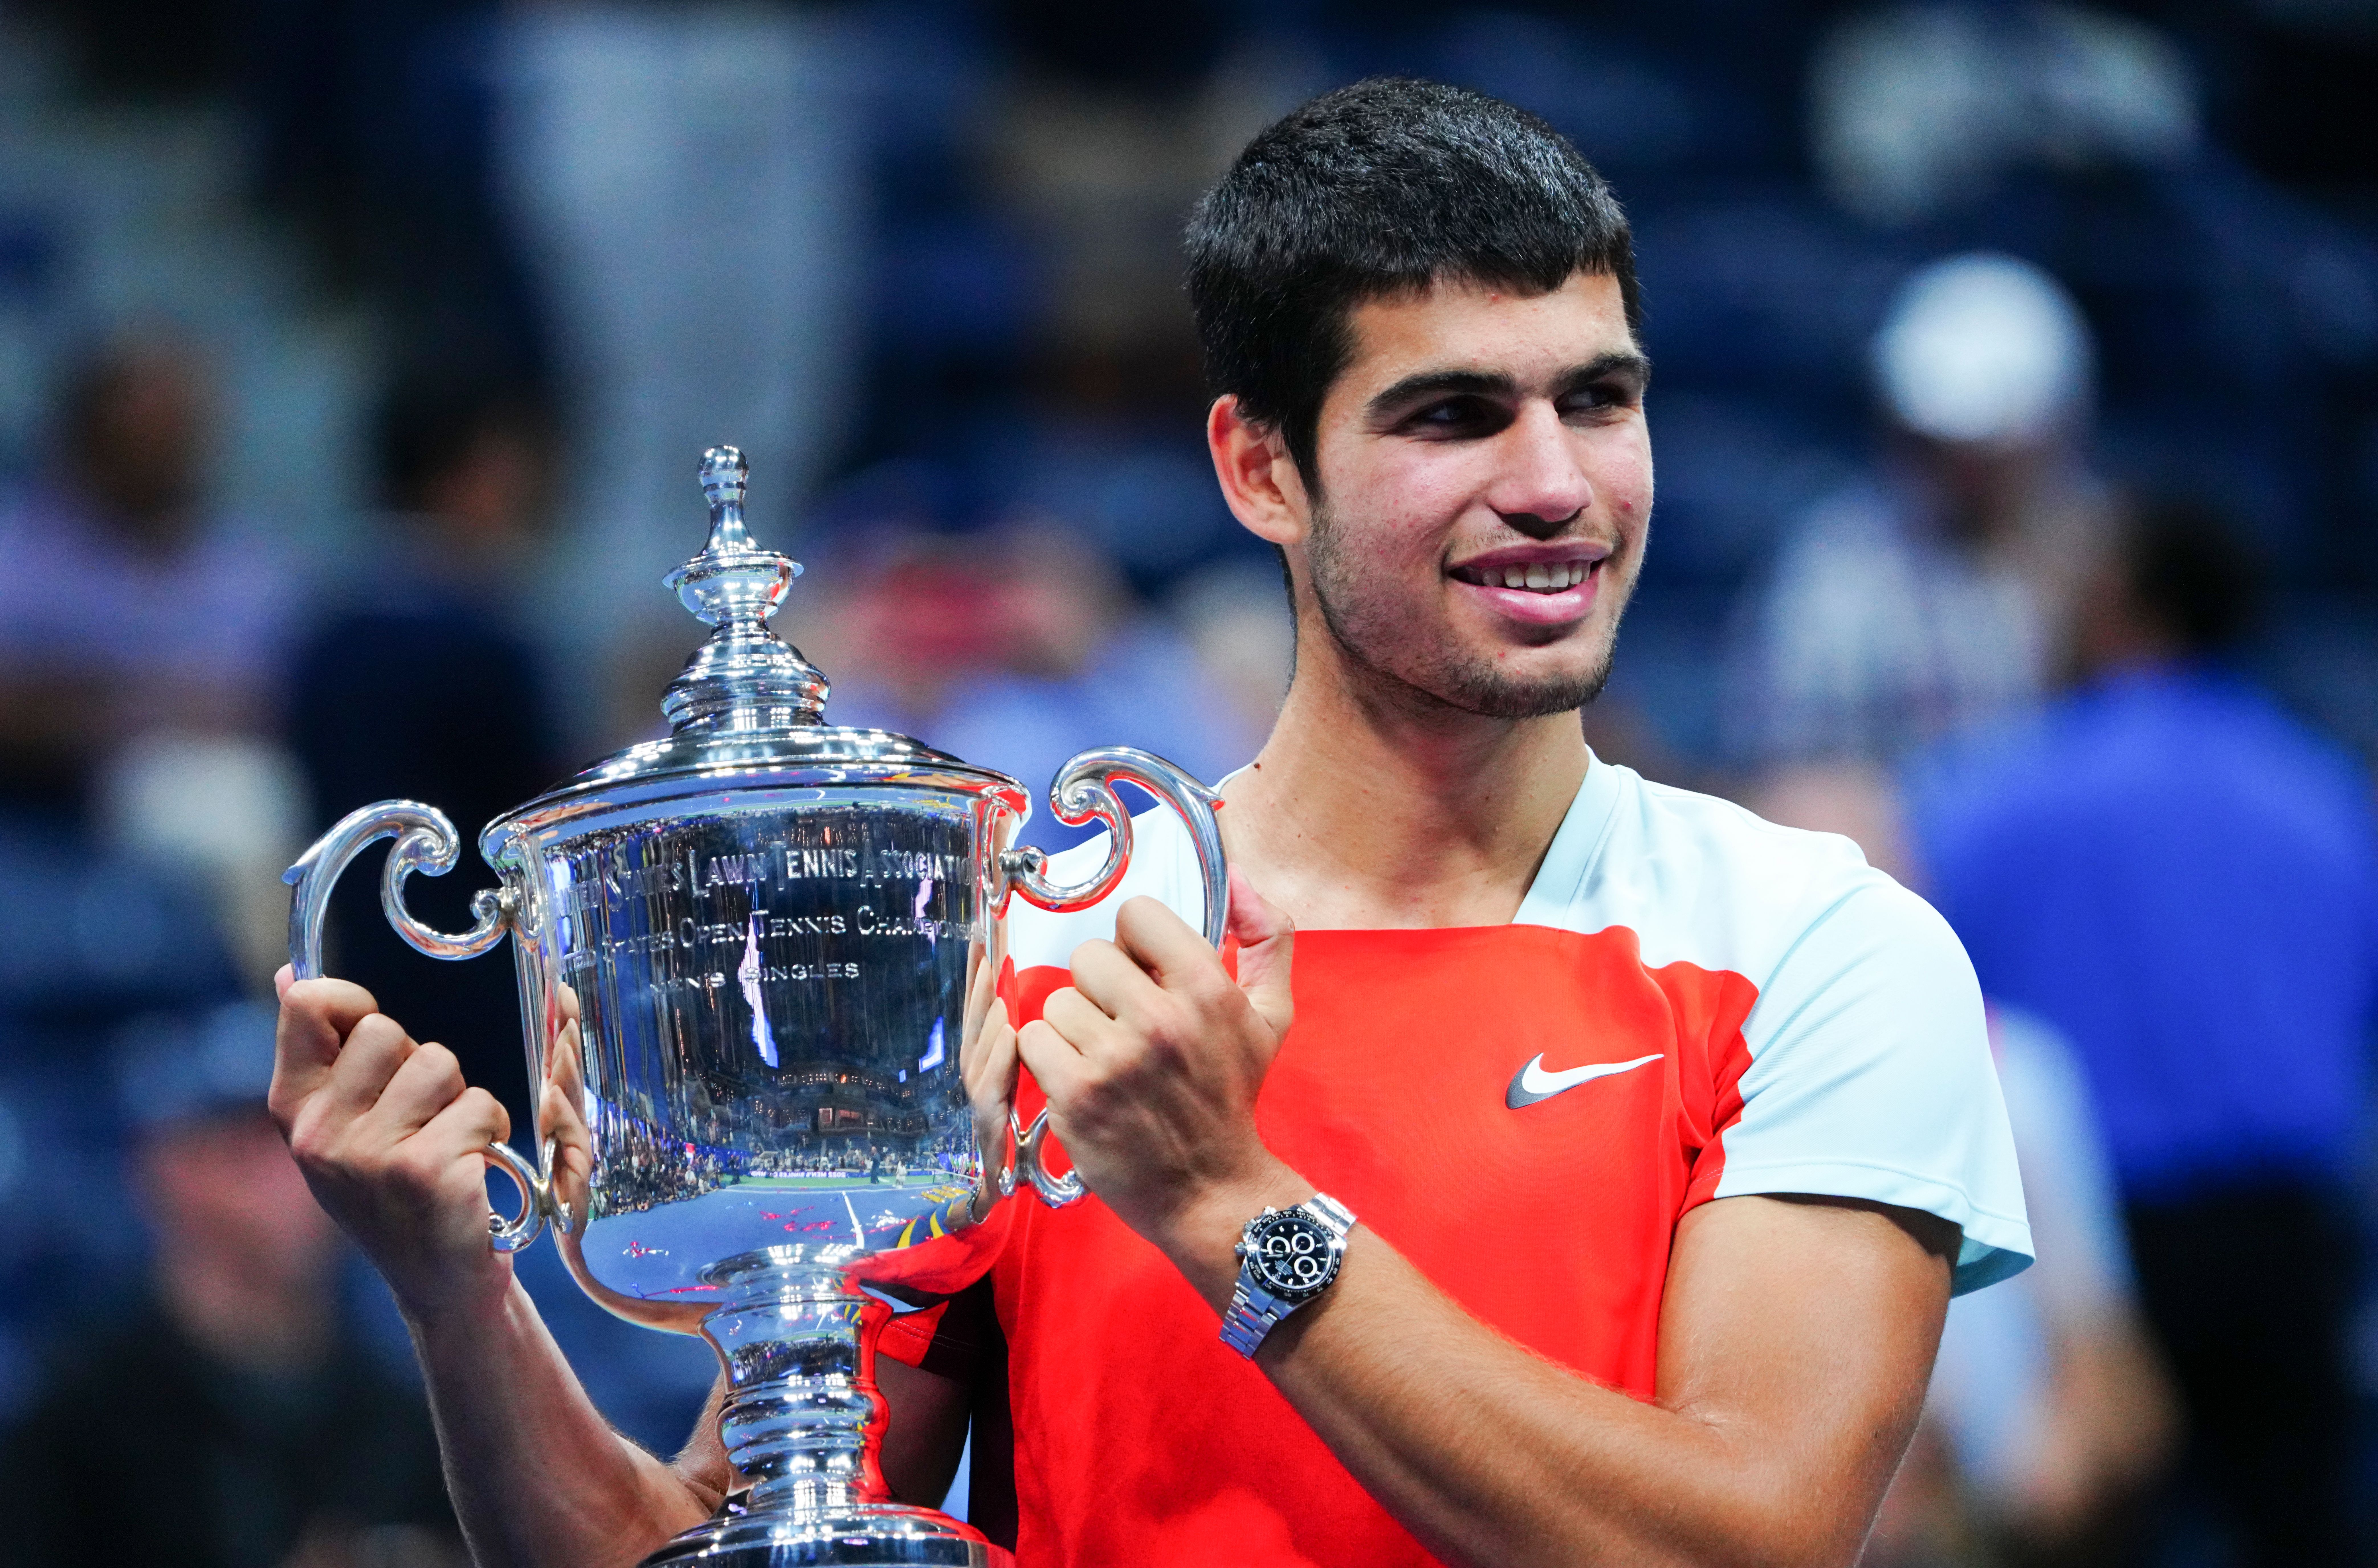 Carlos Alcaraz celebrates clinching his first ever Grand Slam title US Open Championships 2022